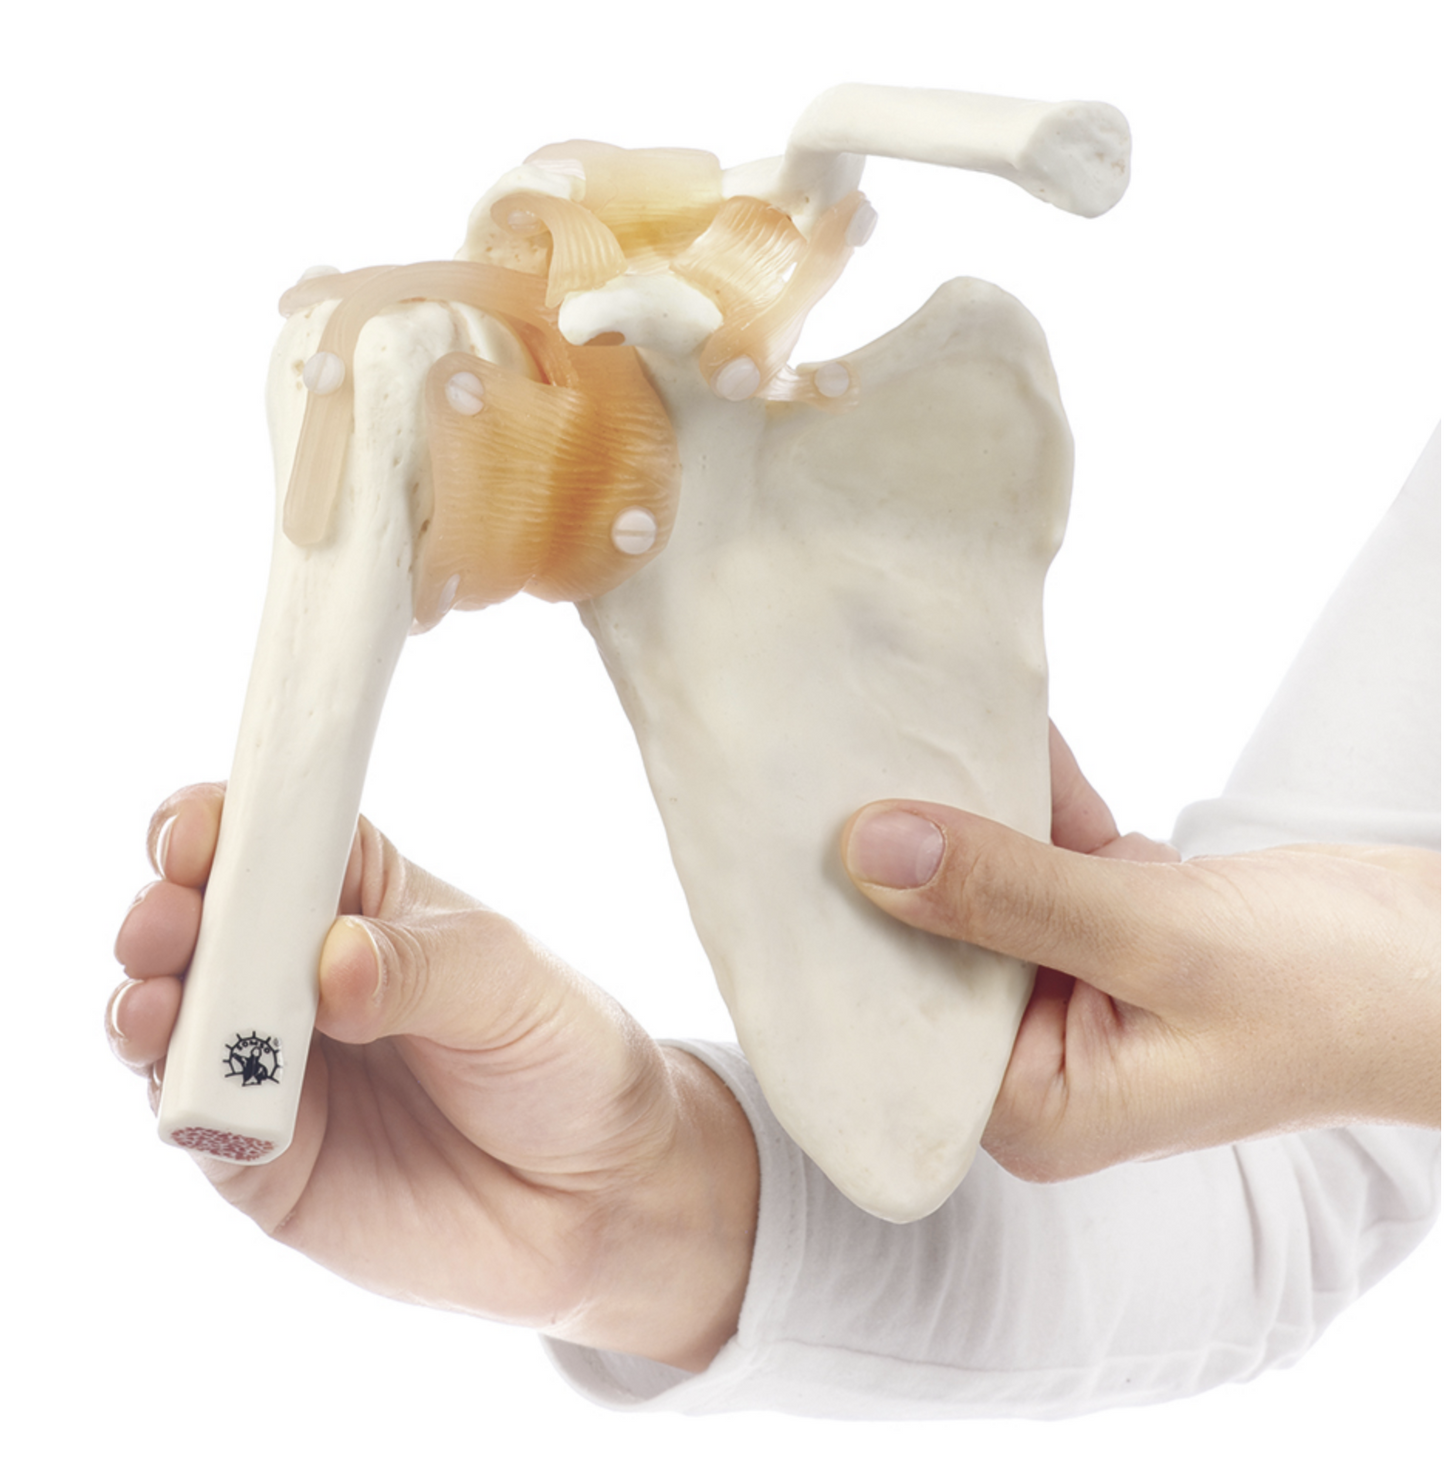 Flexible shoulder model with ligaments and highly realistic bones